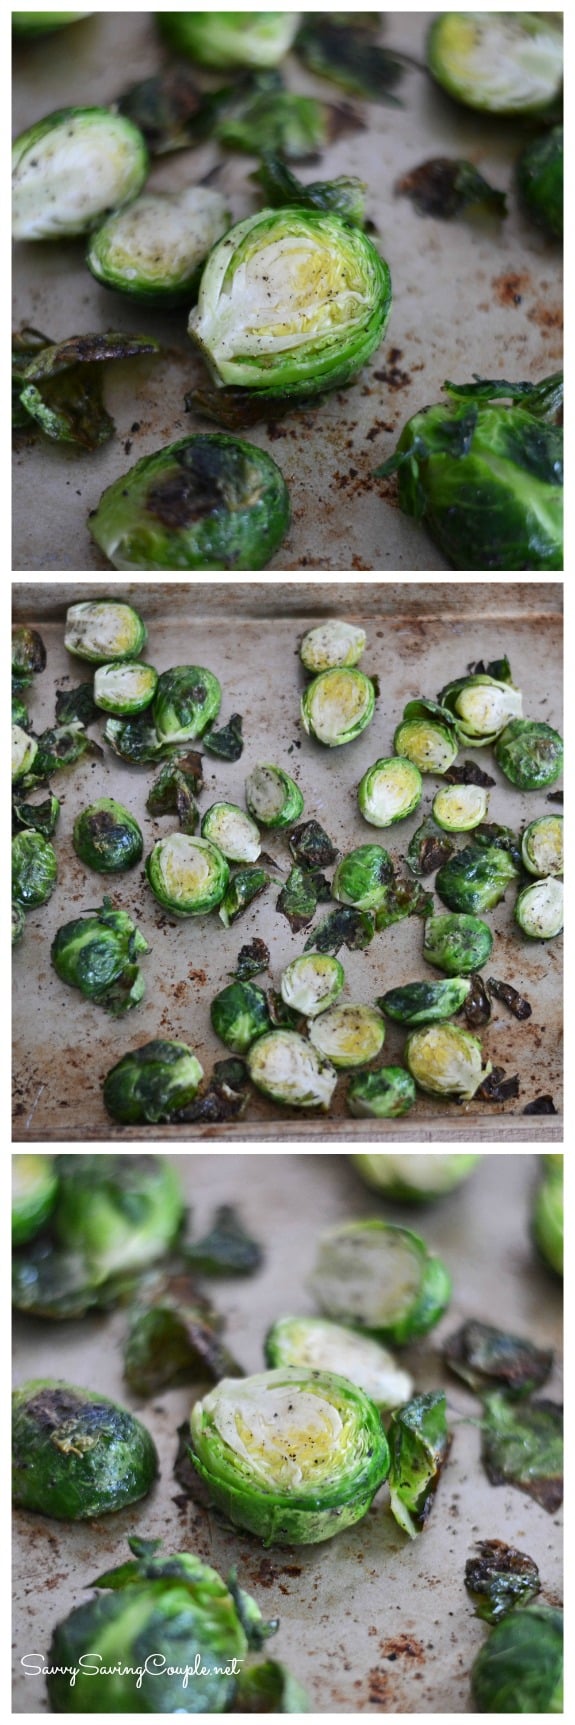 oven-baked-brussel-sprouts